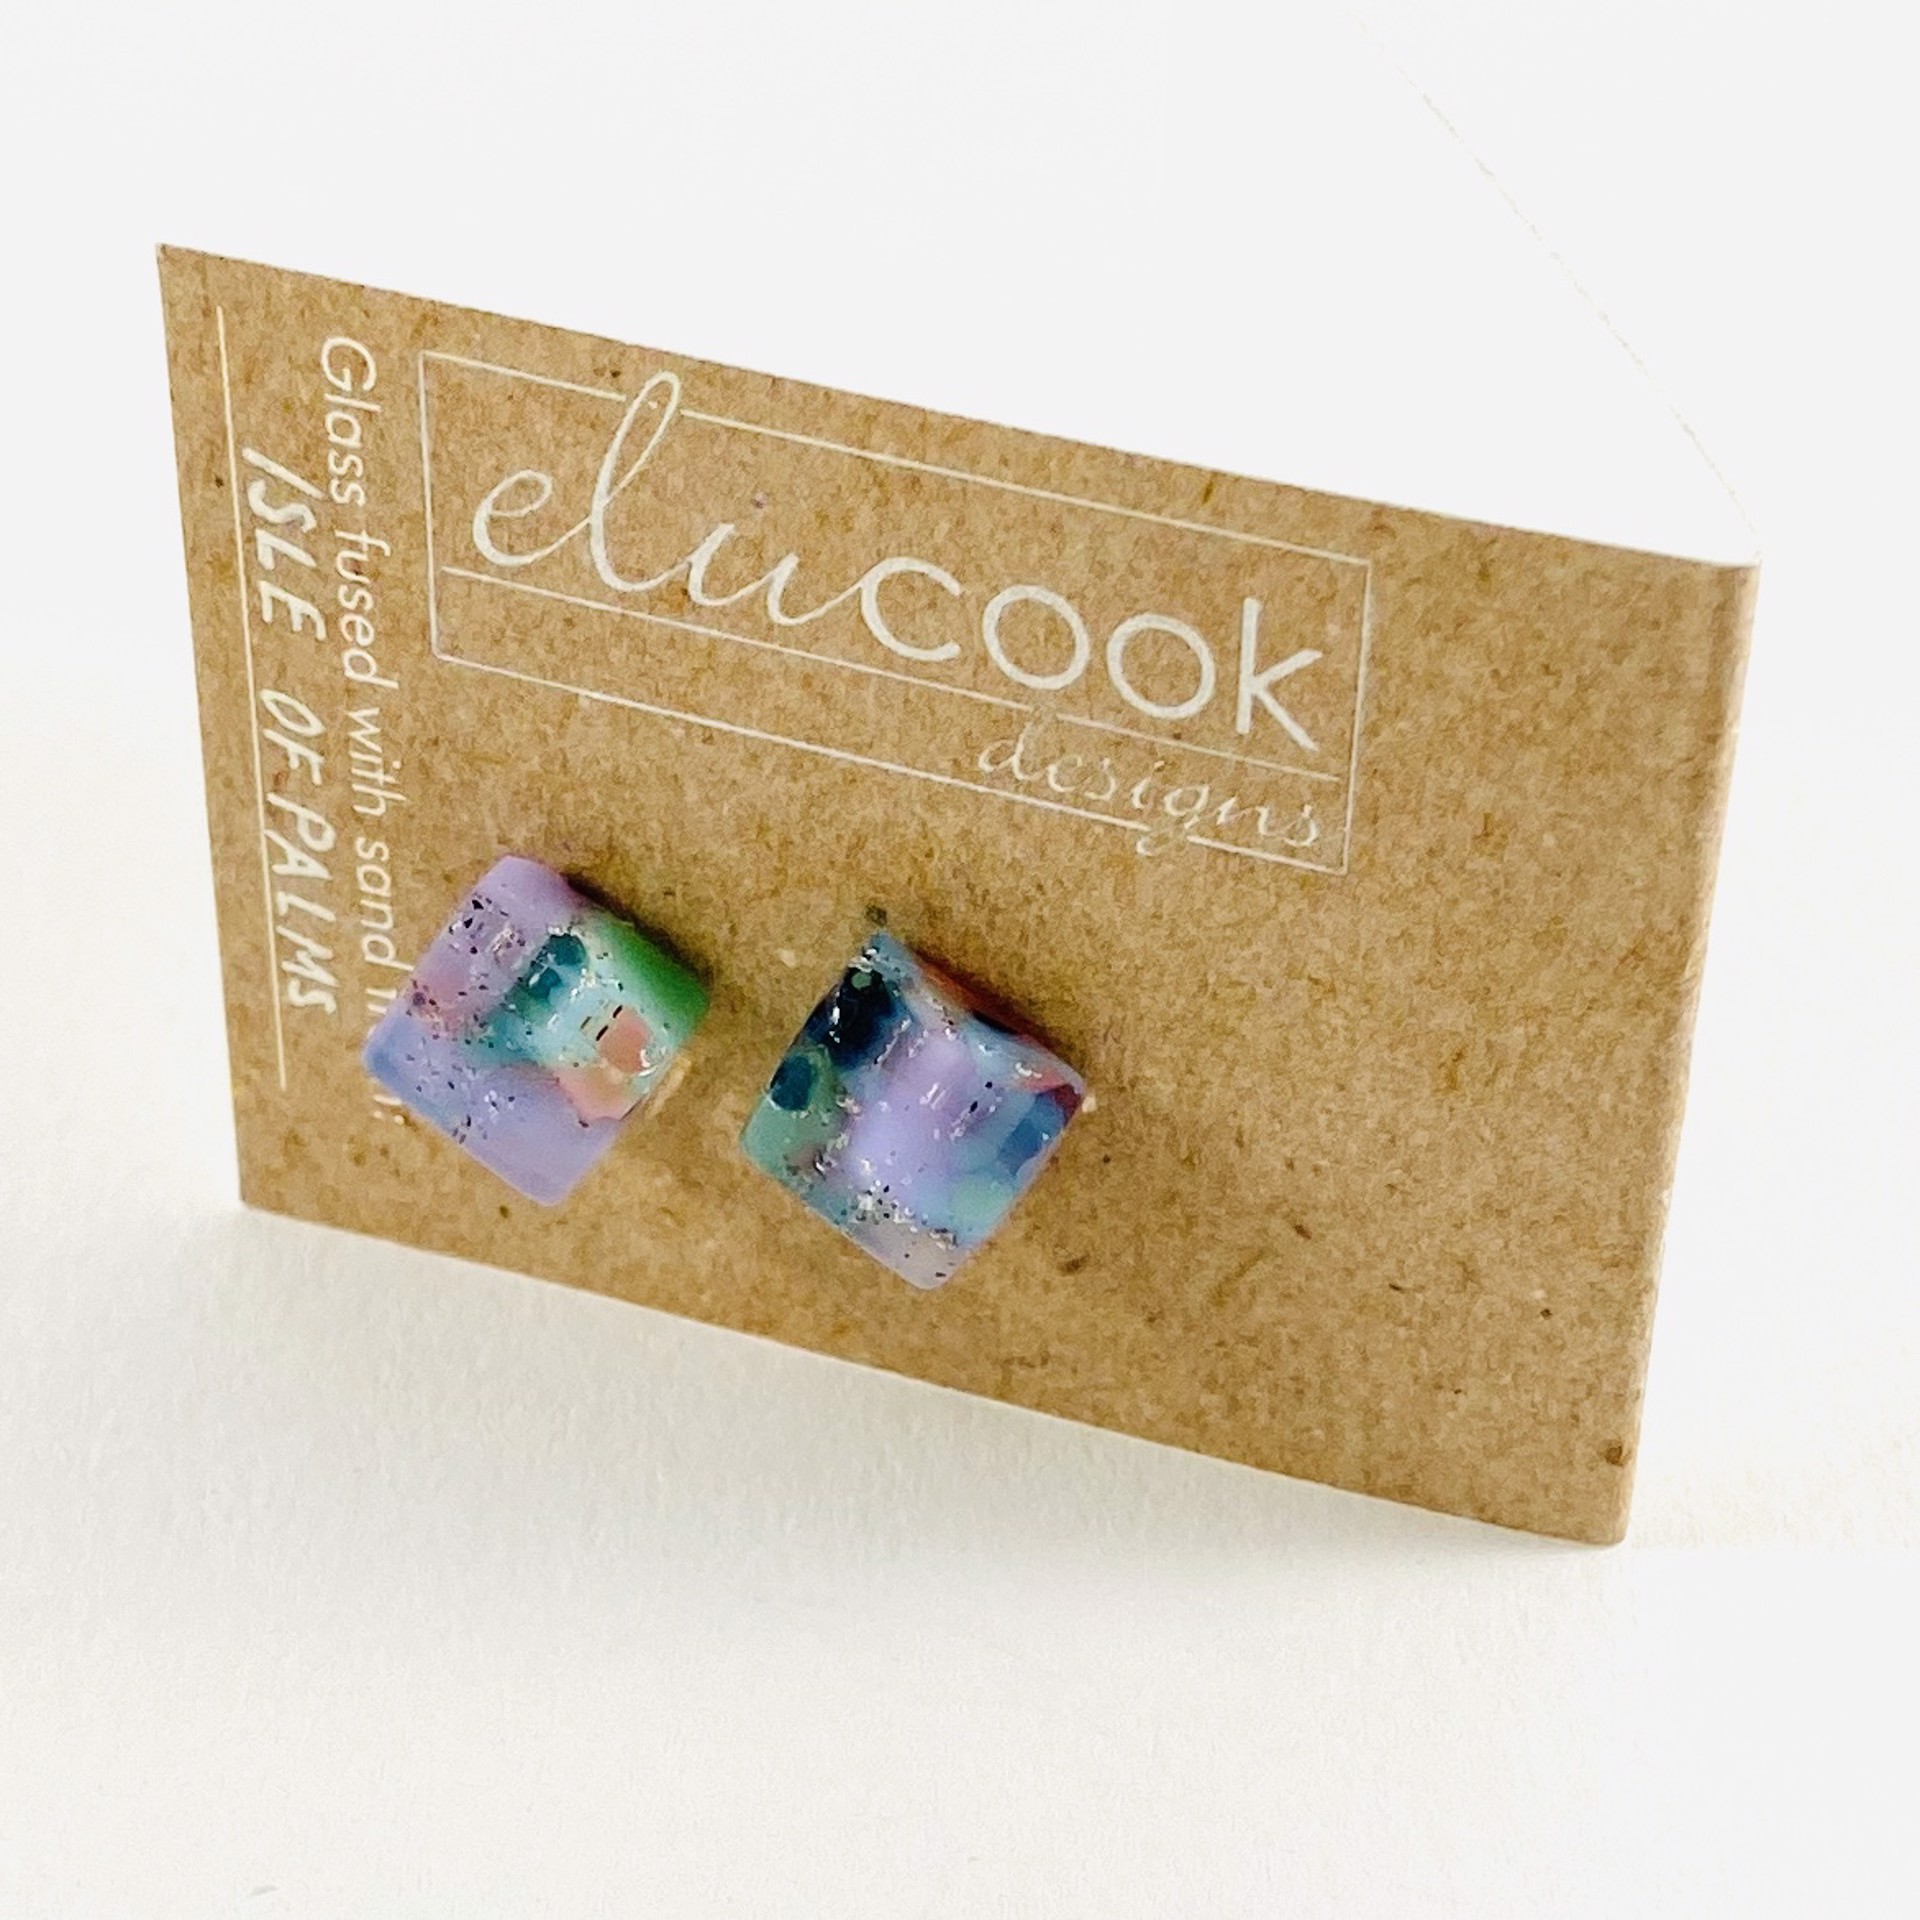 Button Earrings, 8g by Emily Cook